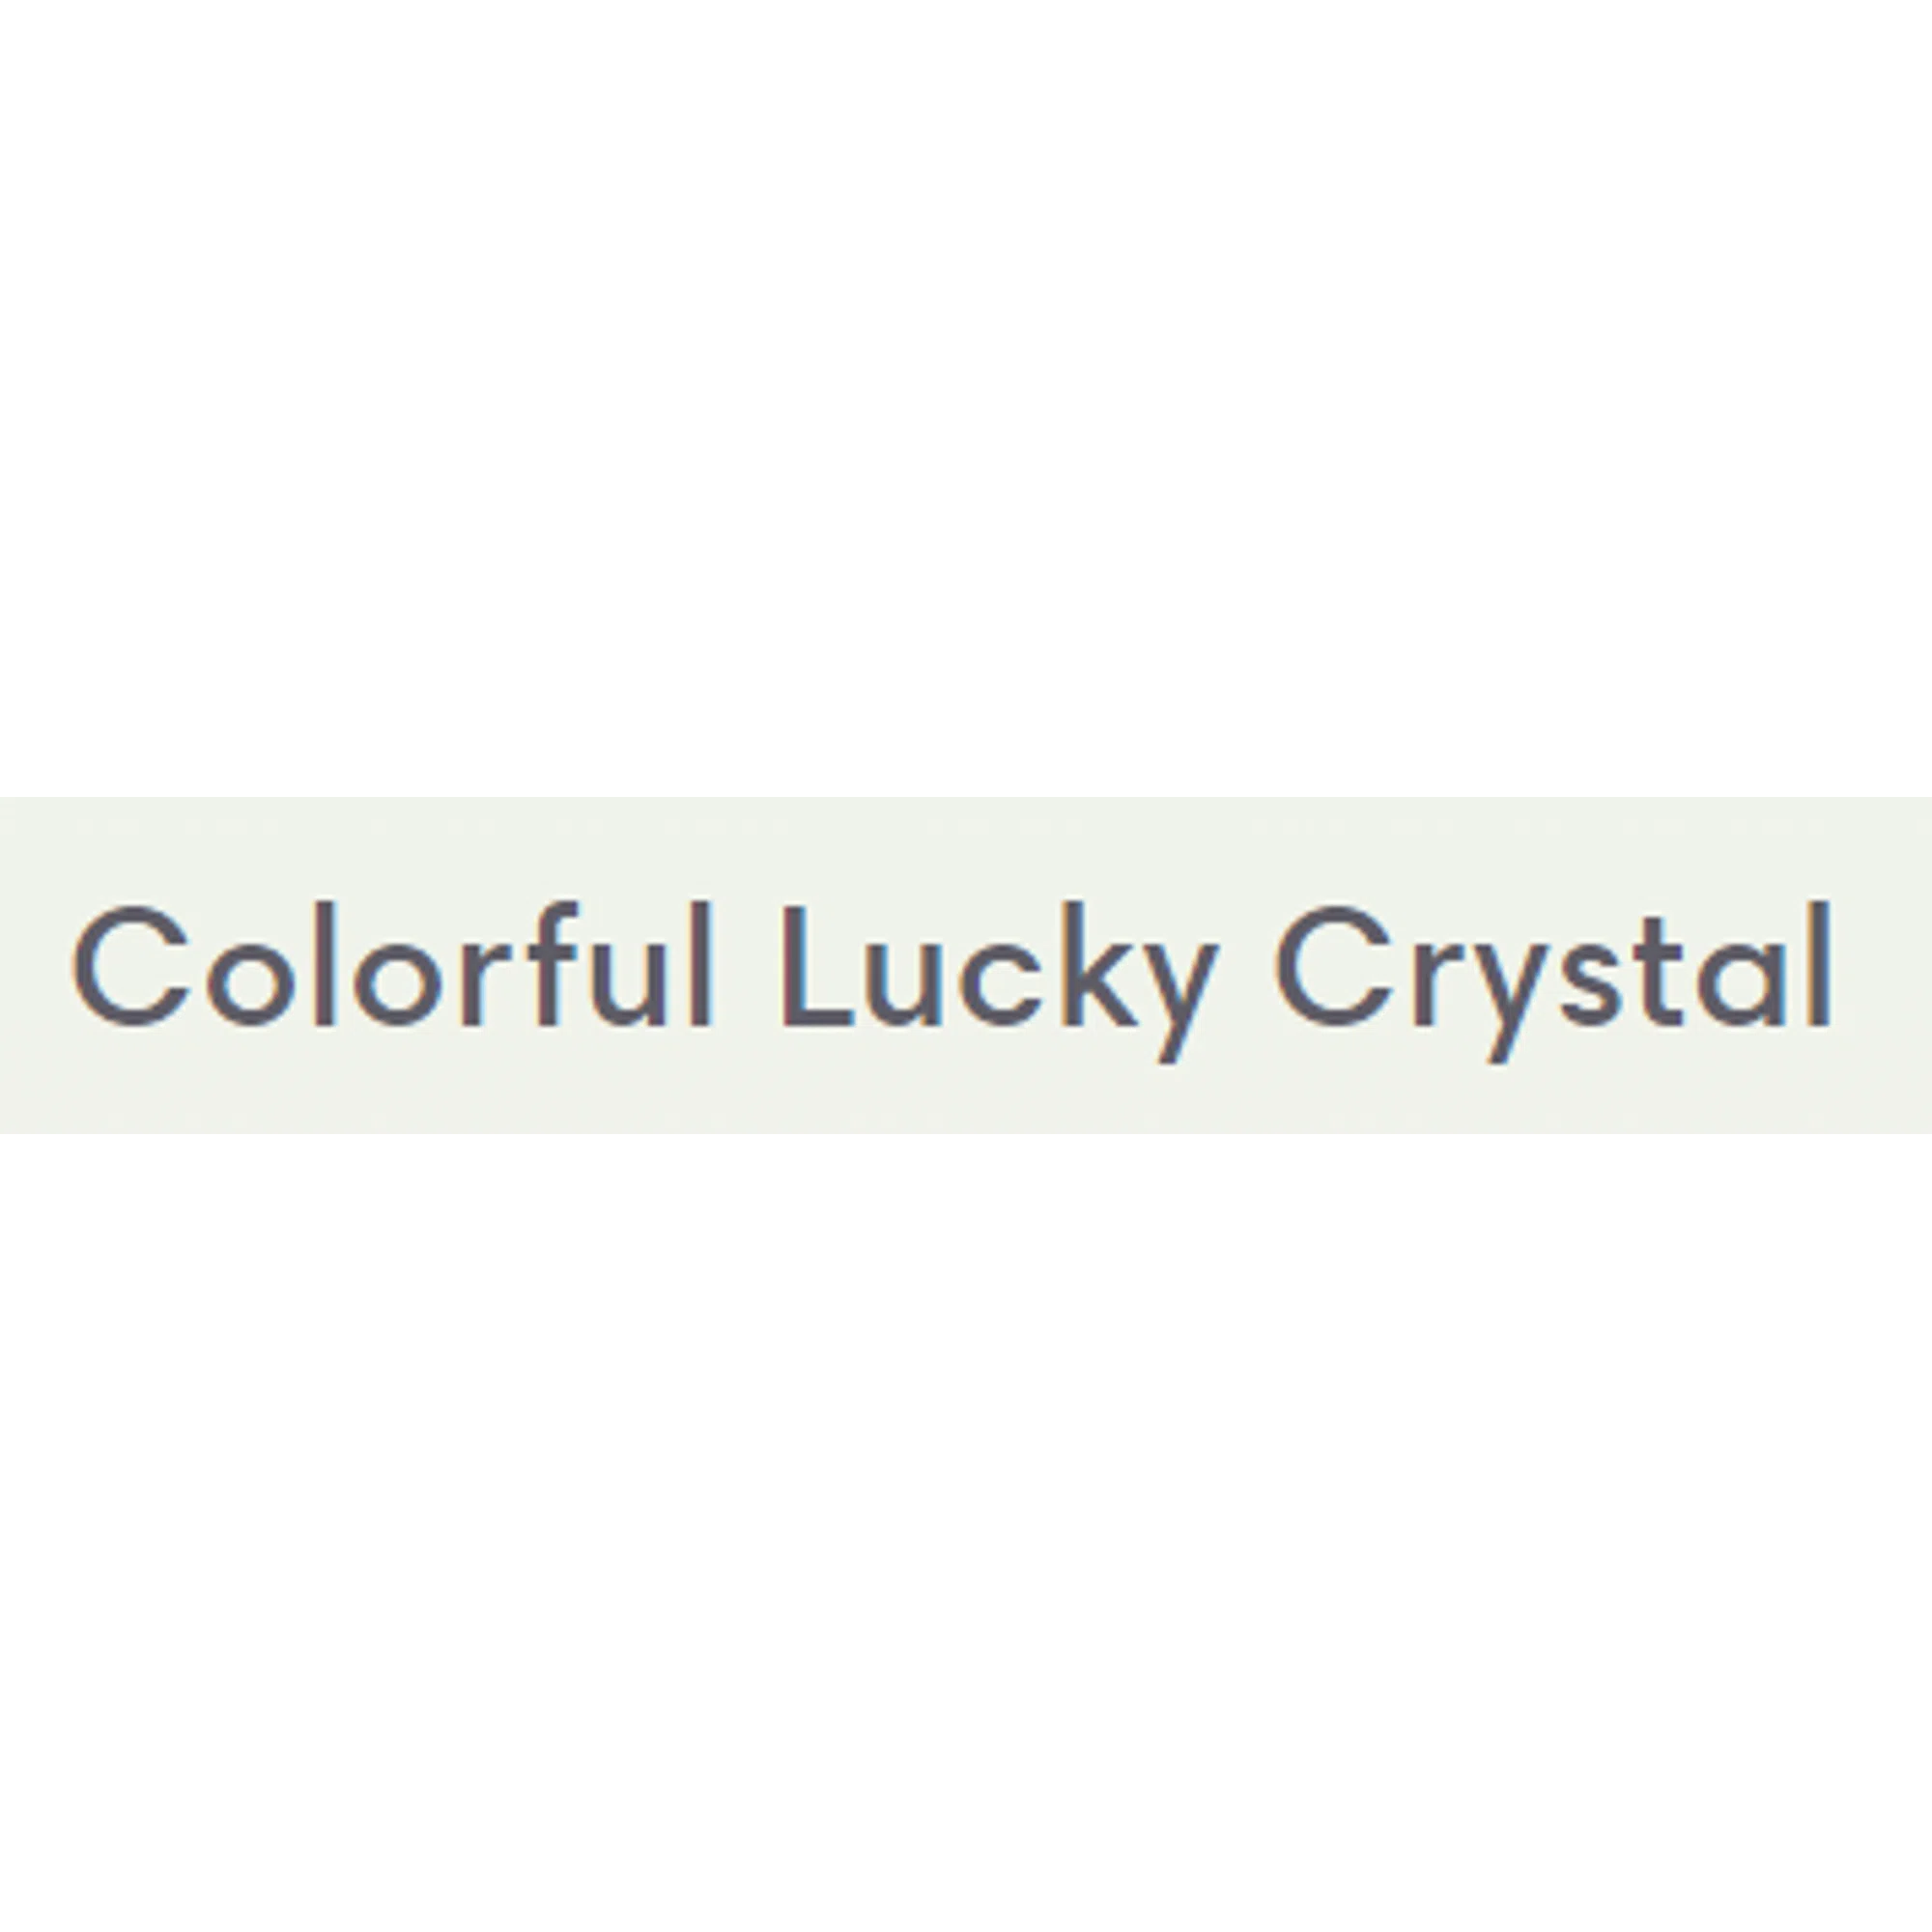 Colorful Lucky Crystal